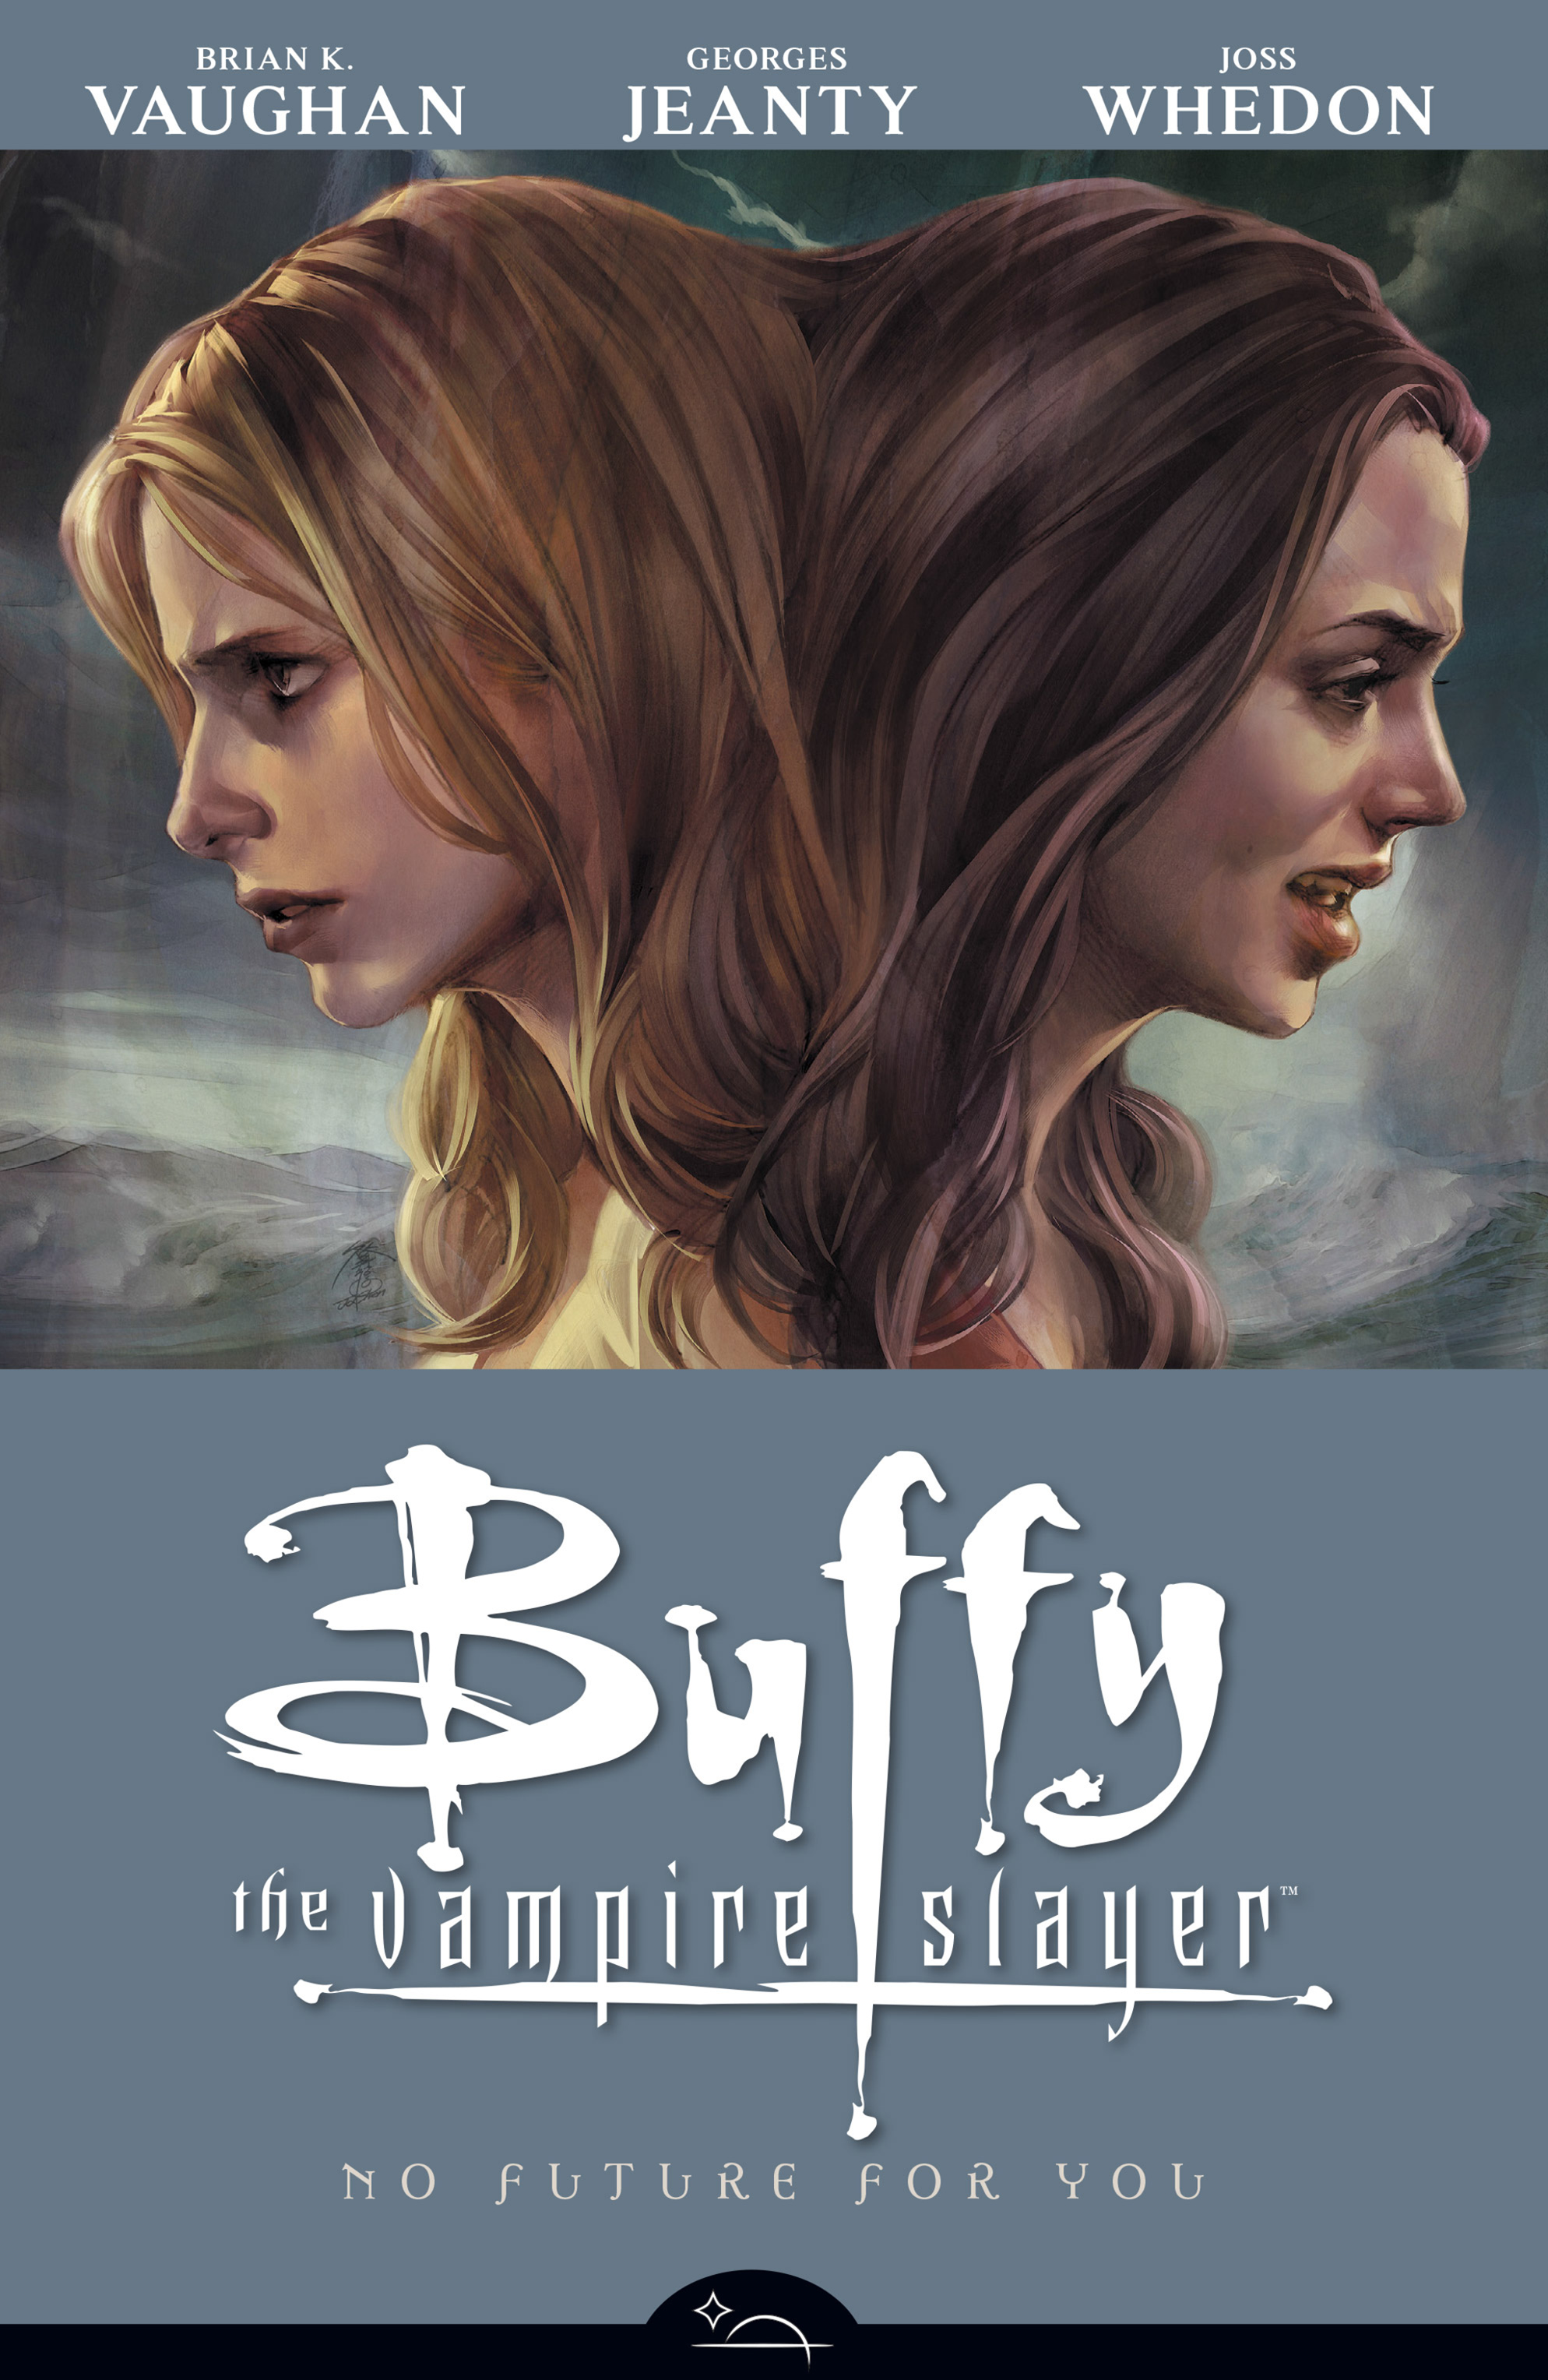 Read online Buffy the Vampire Slayer Season Eight comic -  Issue # _TPB 2 - No Future For You - 1